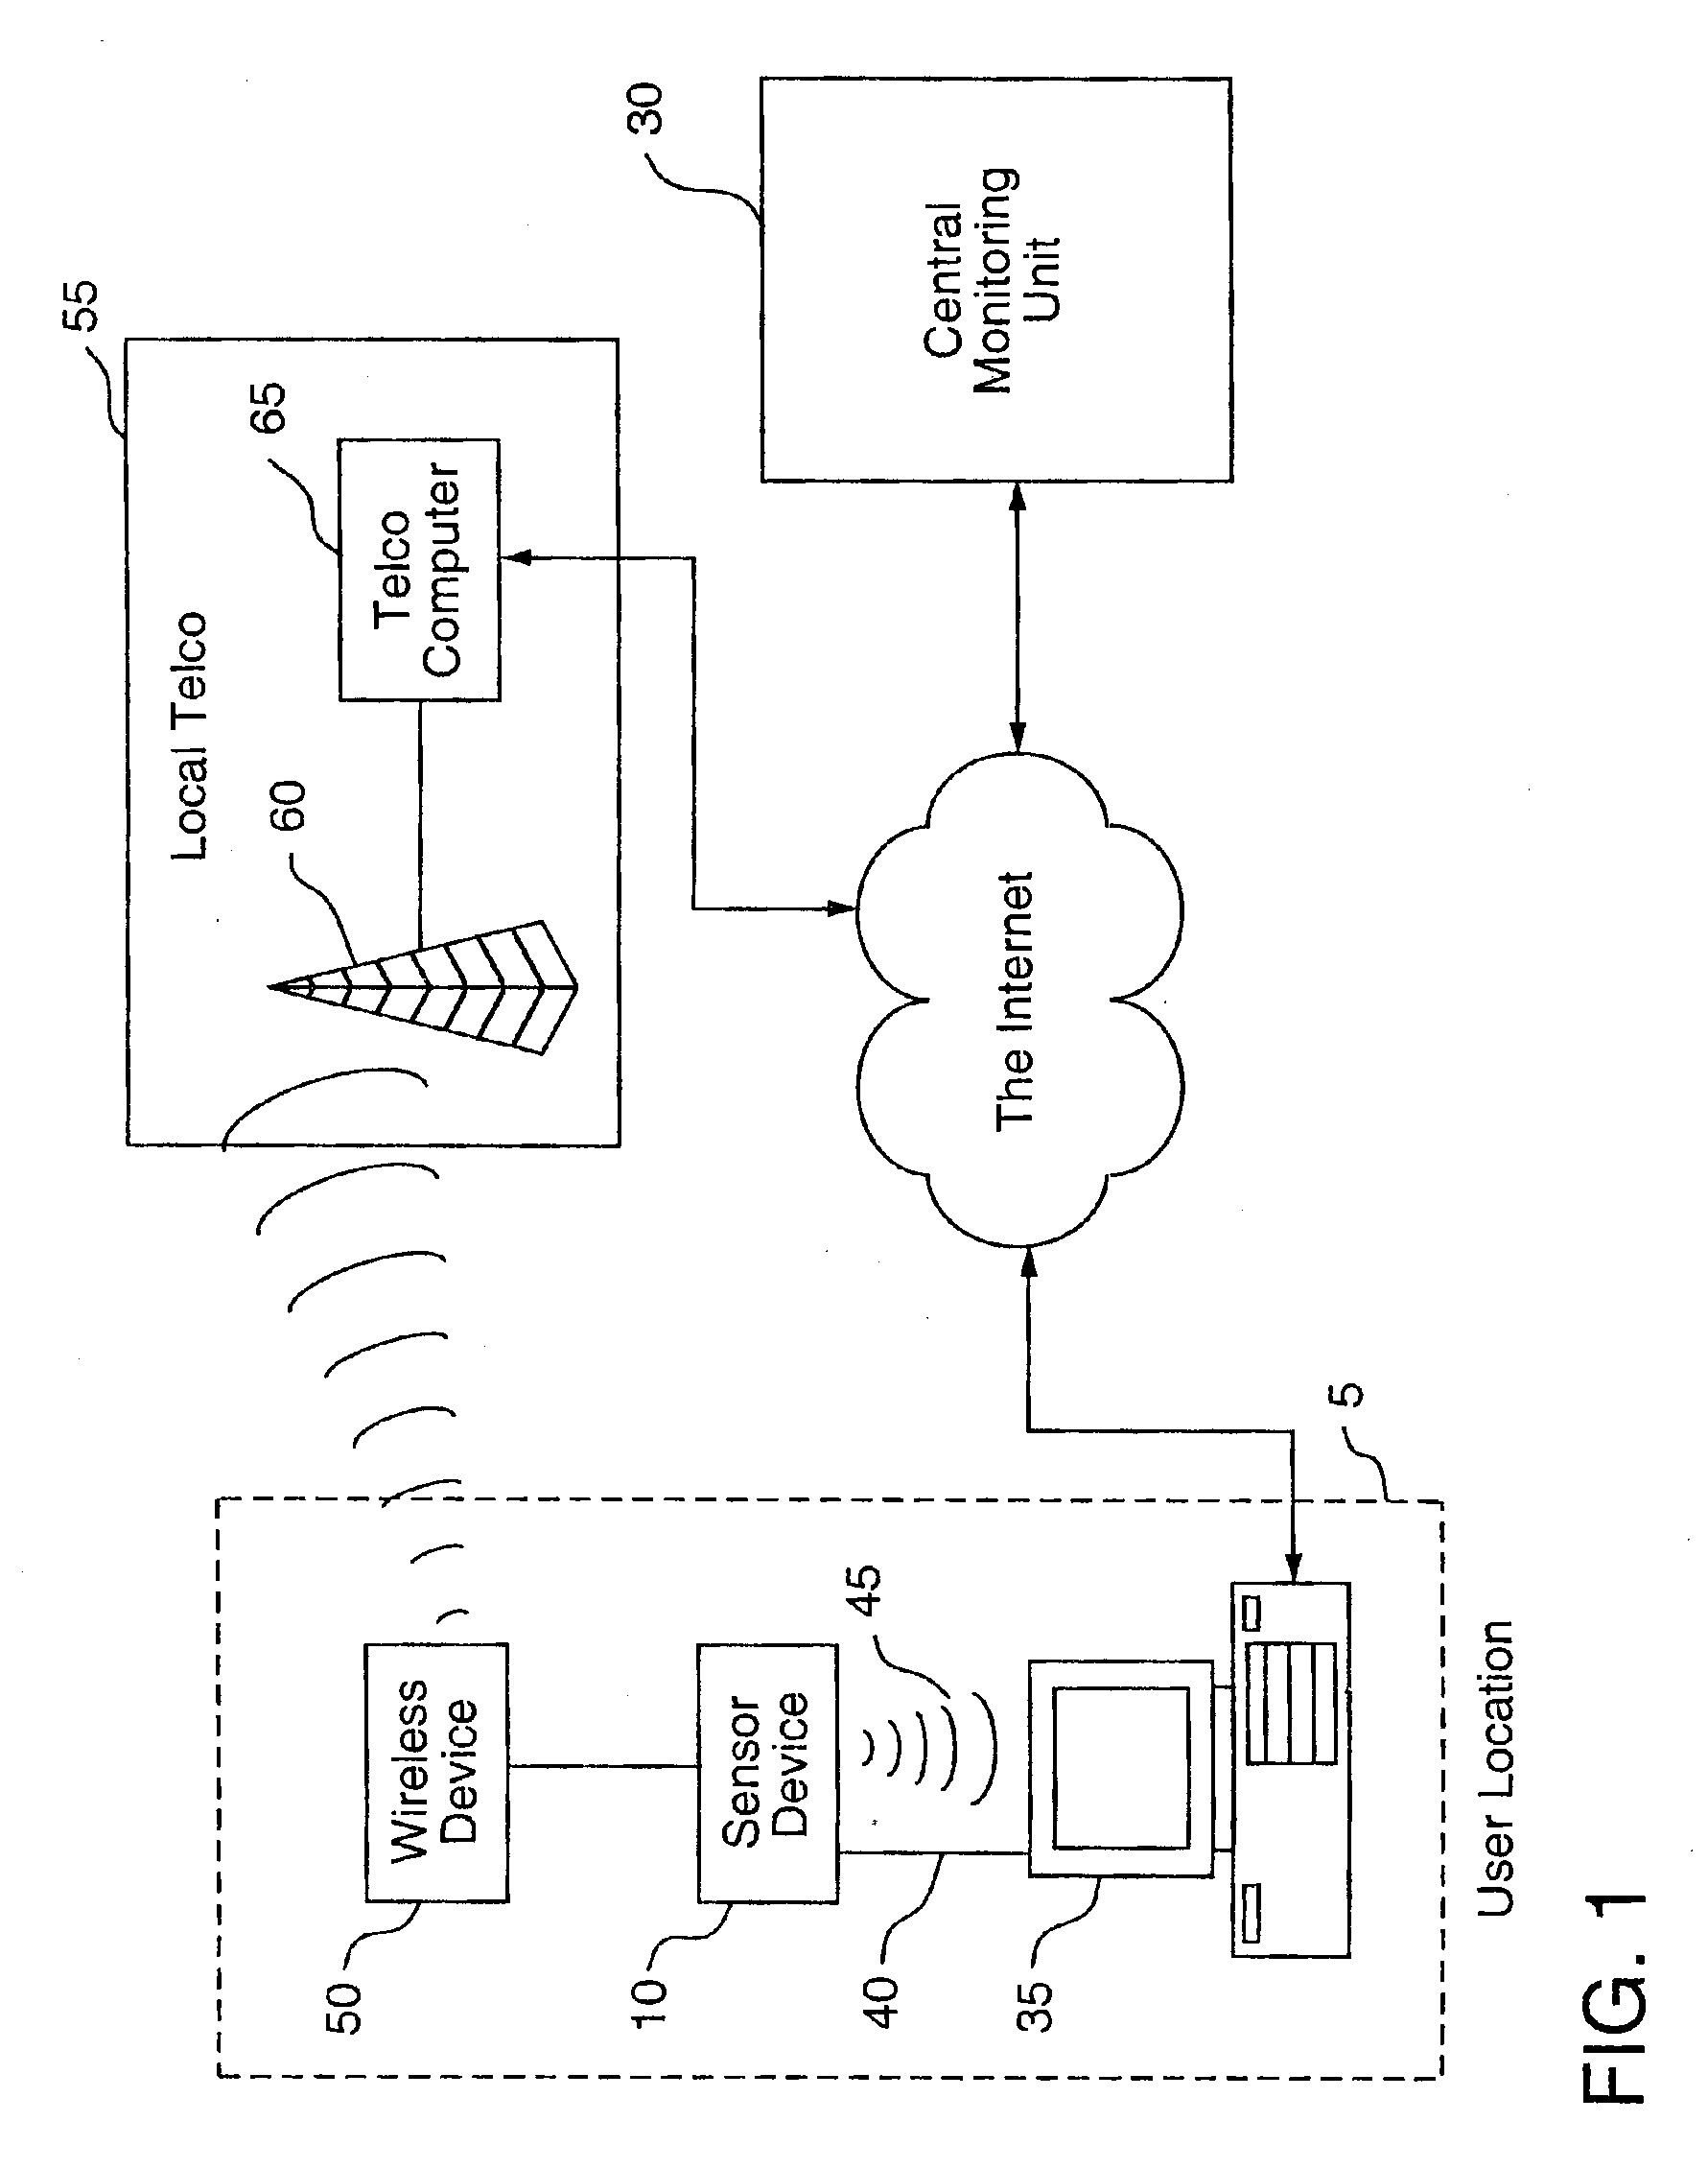 Method and apparatus for auto journaling of body states and providing derived physiological states utilizing physiological and/or contextual parameter